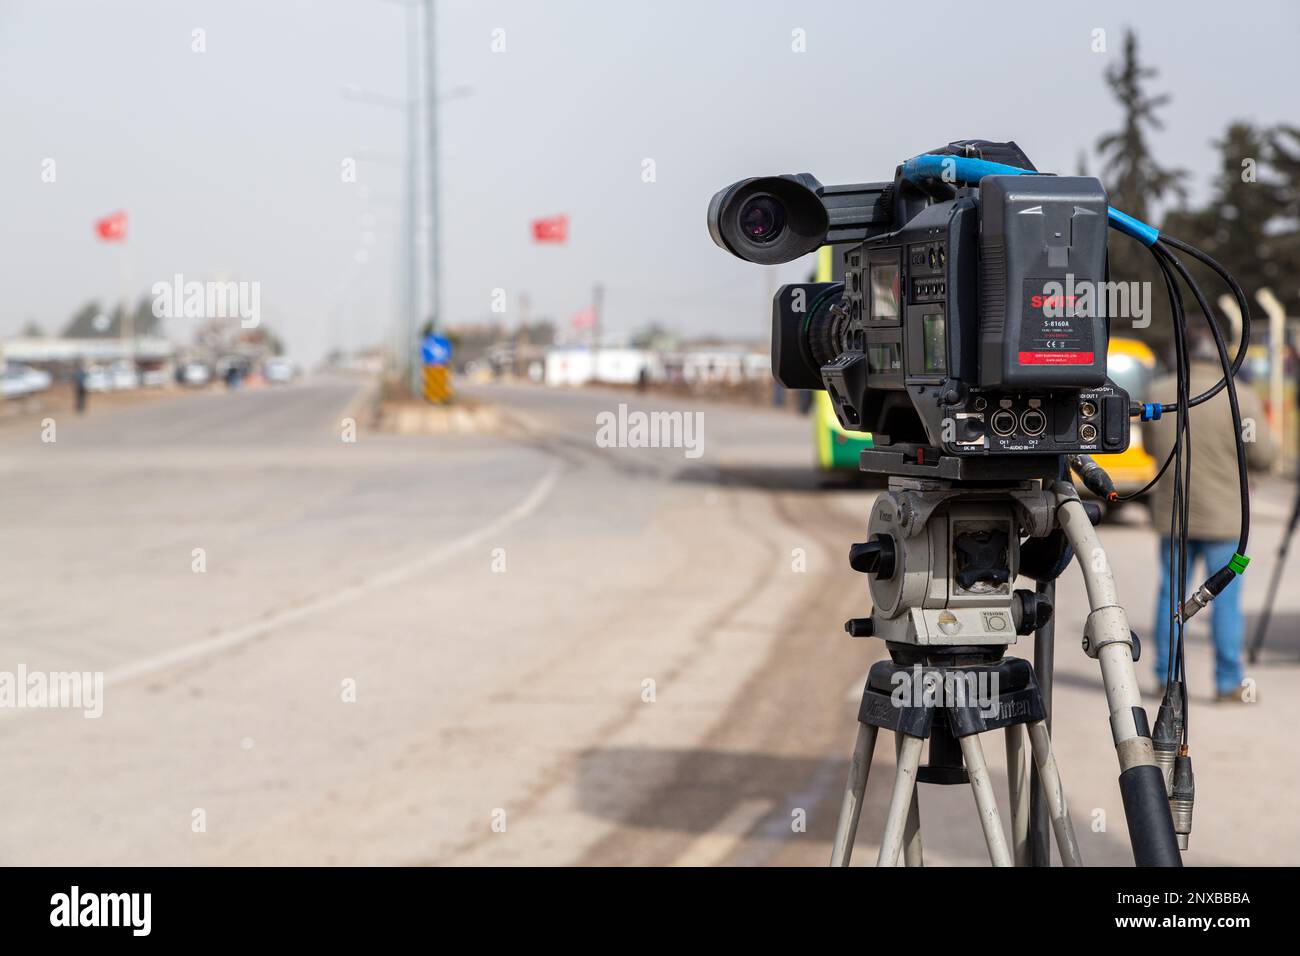 Camera, tripod and cables system prepared for live broadcast. Kilis,Turkey. Stock Photo